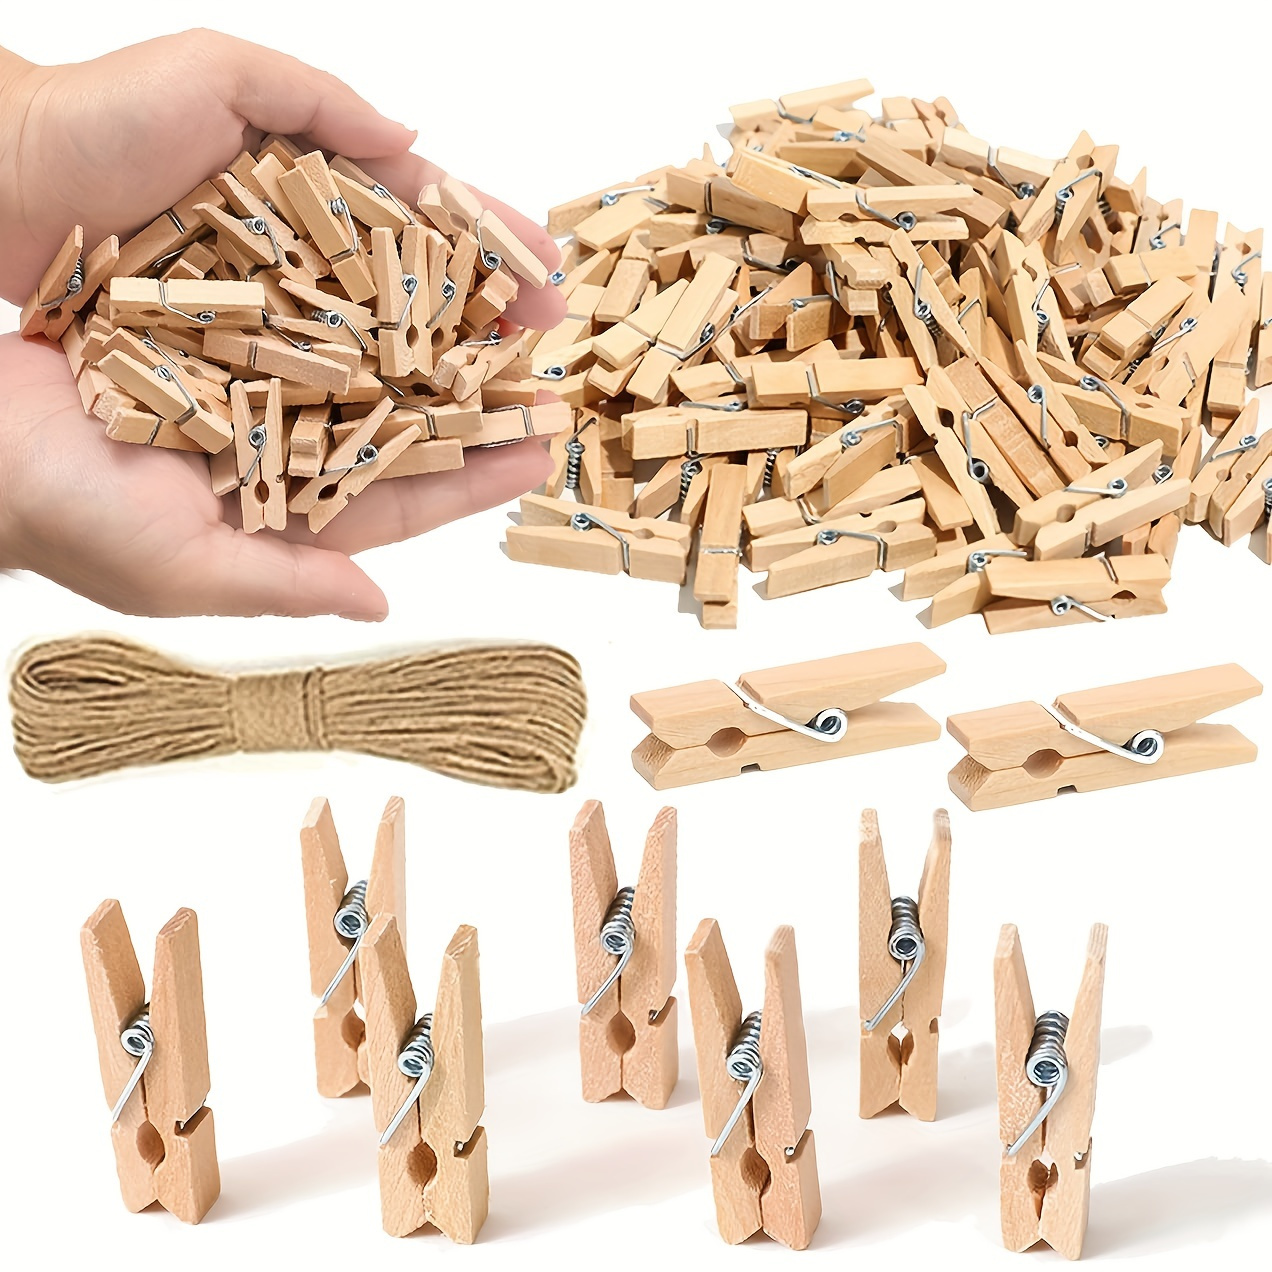 20pcs 1-inch Miniature Wooden Crafts With Strong Clips For Photos, Mini  Clothespins, Small Clips For Pictures, Diy Craft Supplies